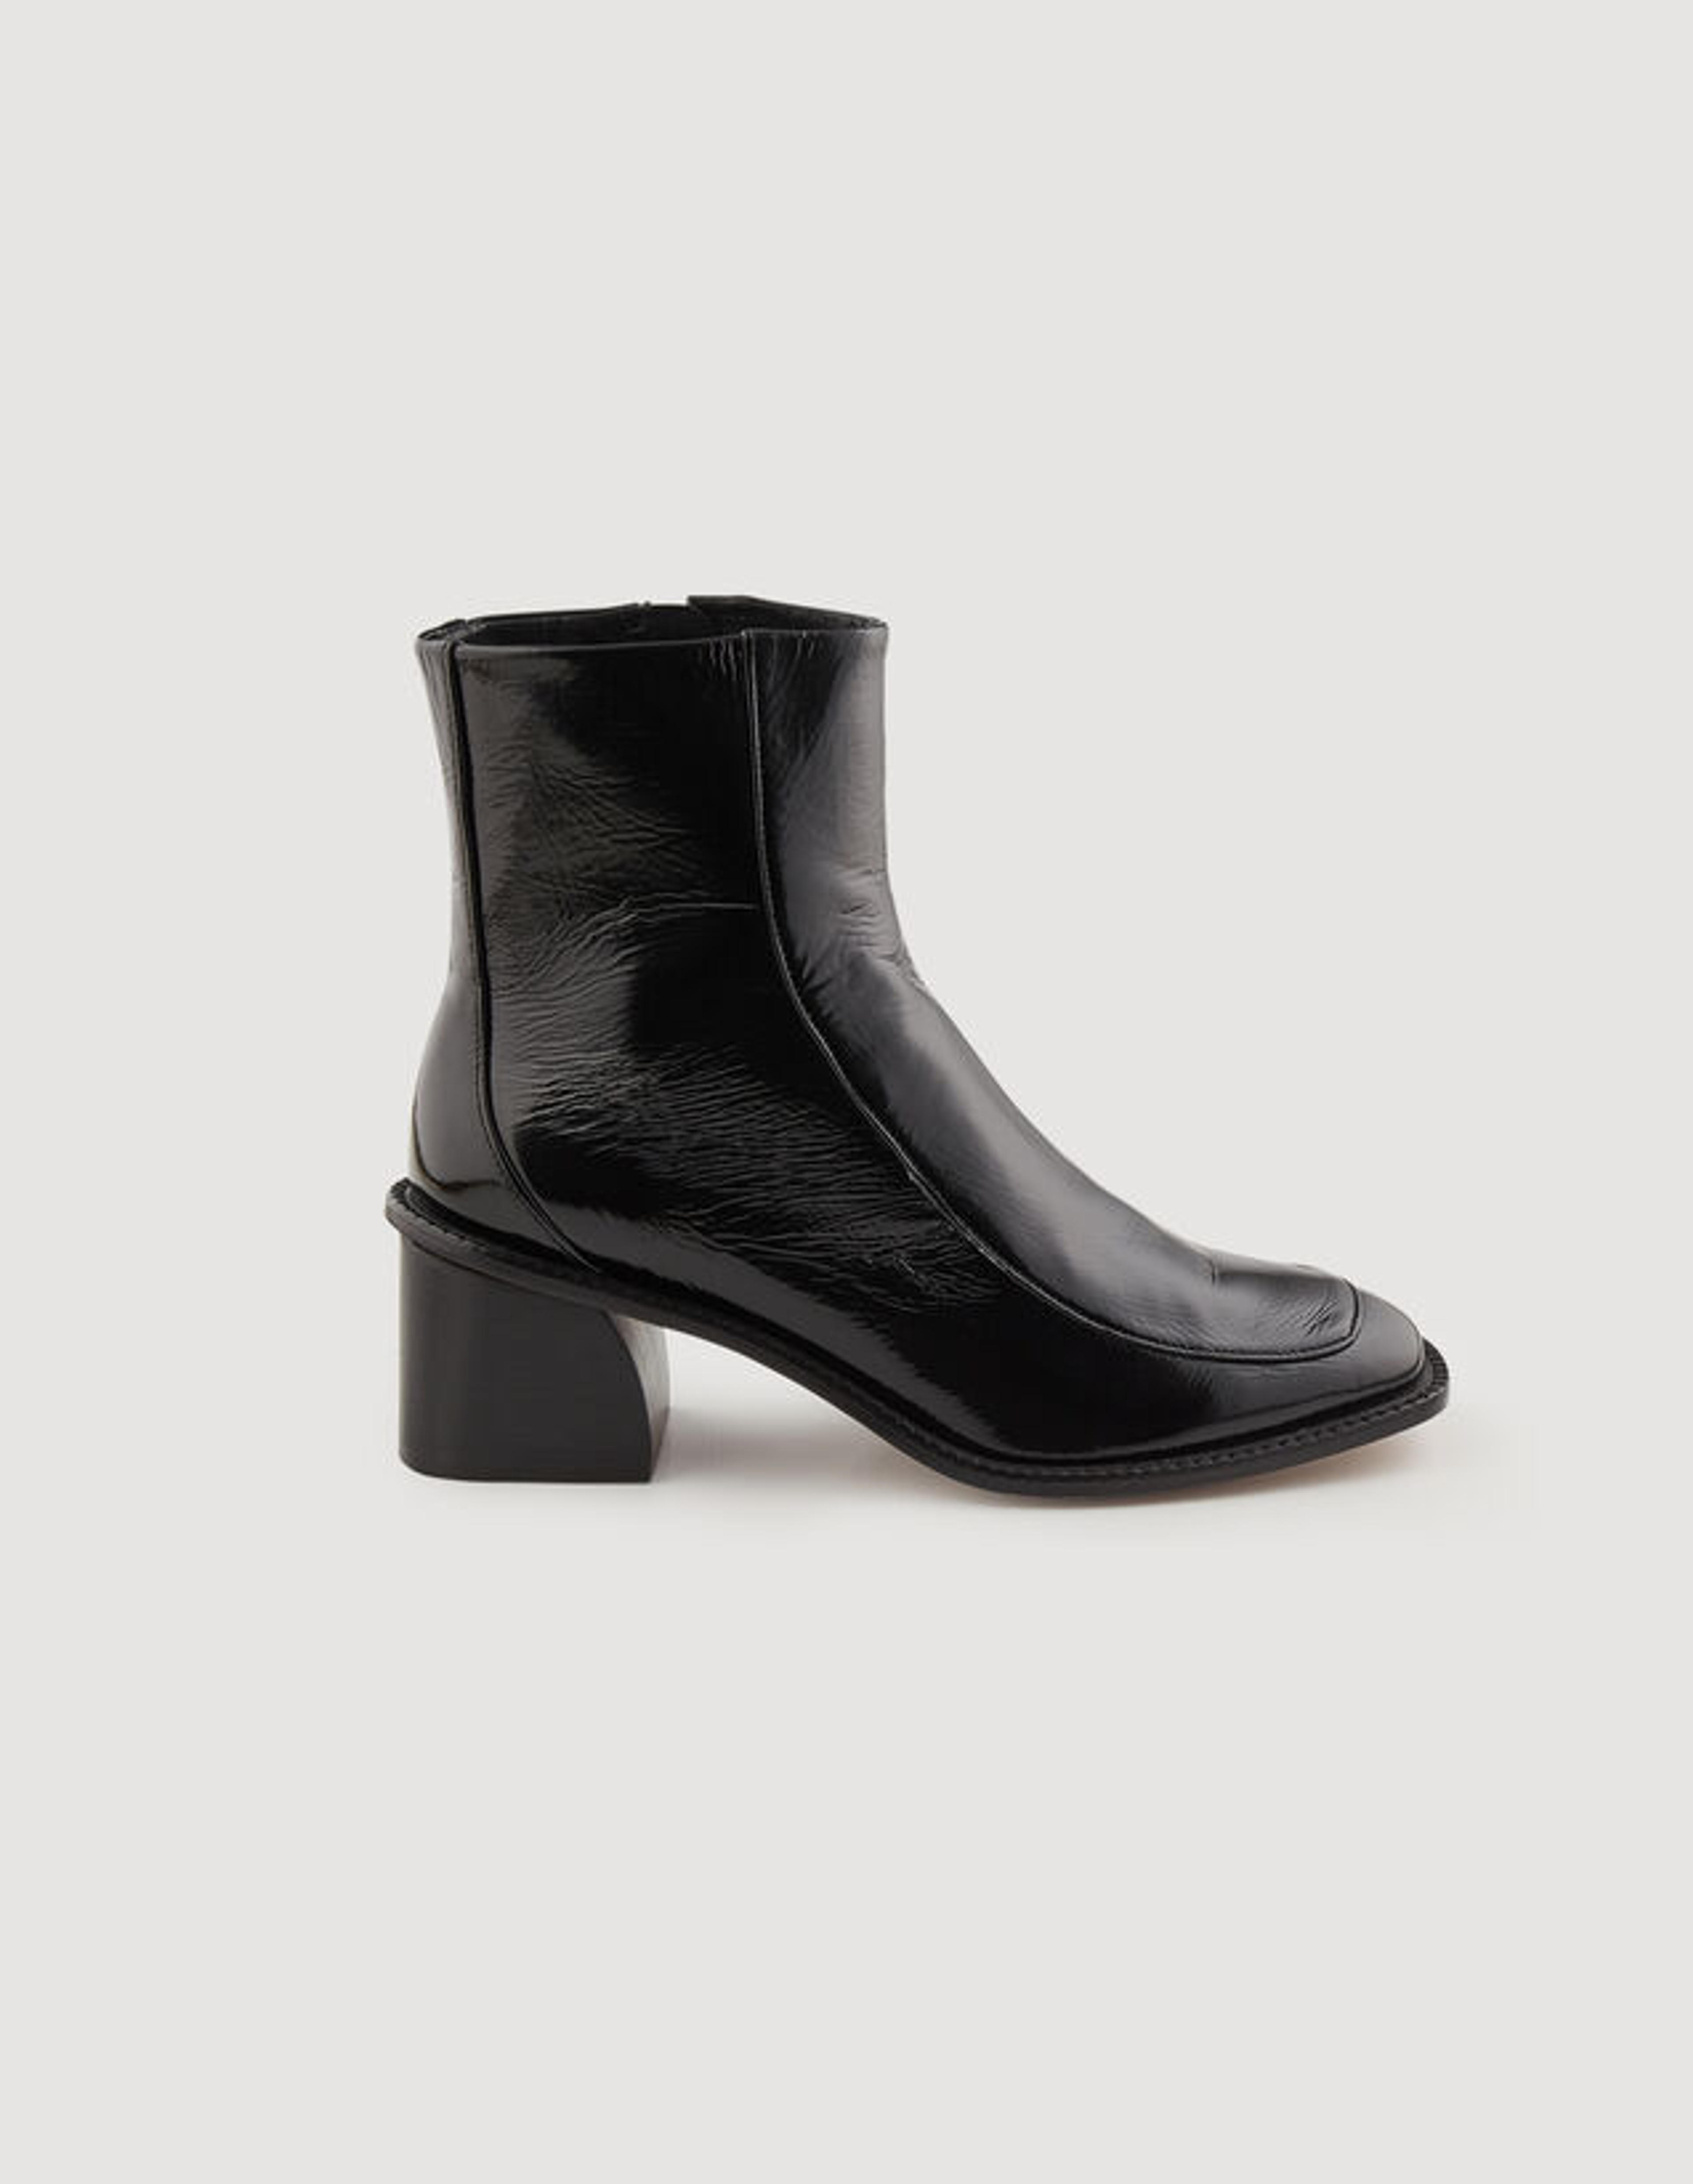 Patent leather boots with heel